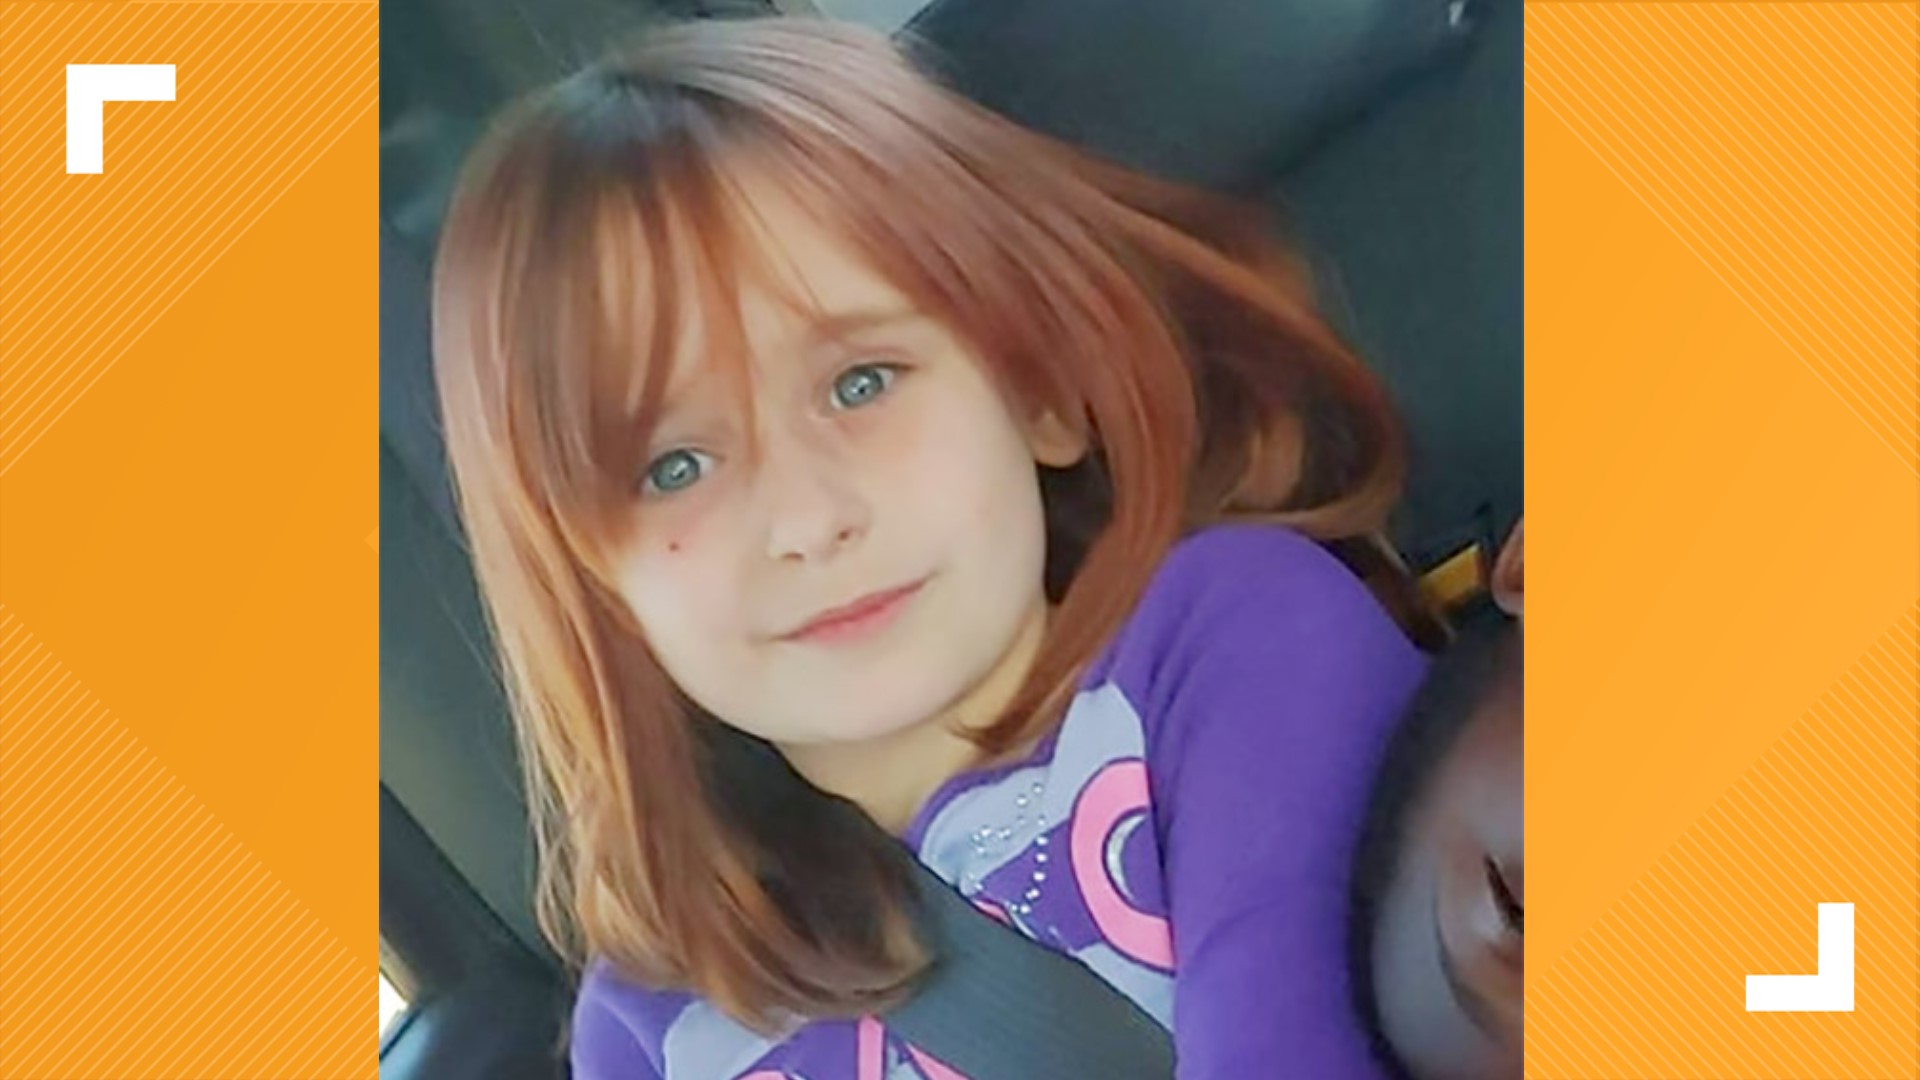 Six-year-old Faye Swetlik from South Carolina is missing. Officials said she hasn't been seen since Monday afternoon.